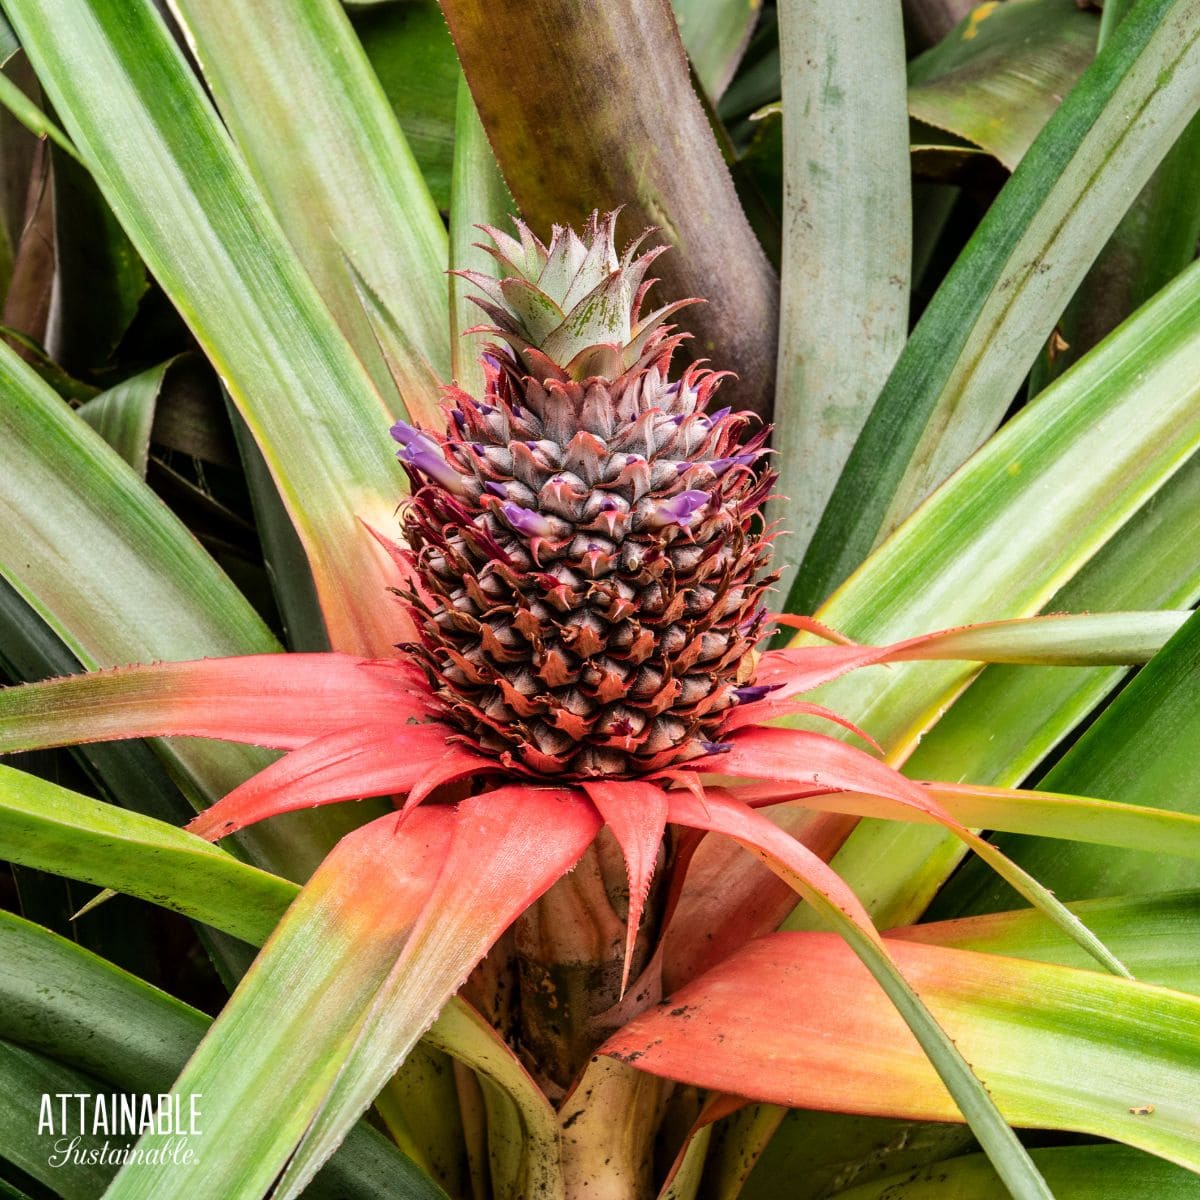 pineapple growing on a plant.